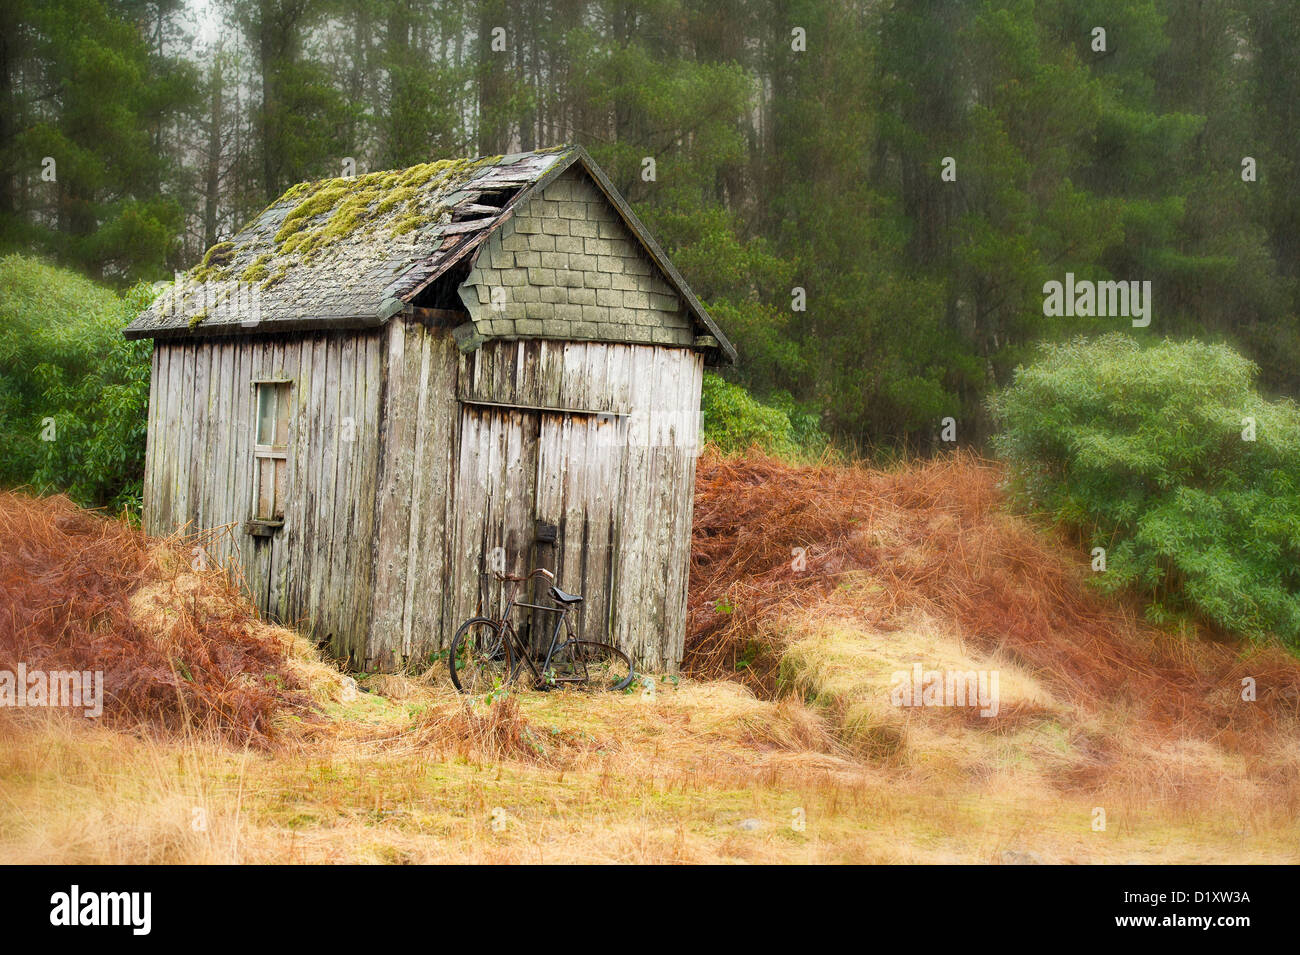 An old bike shed / shack falling down in the pine forest in glencoe Scotland Stock Photo